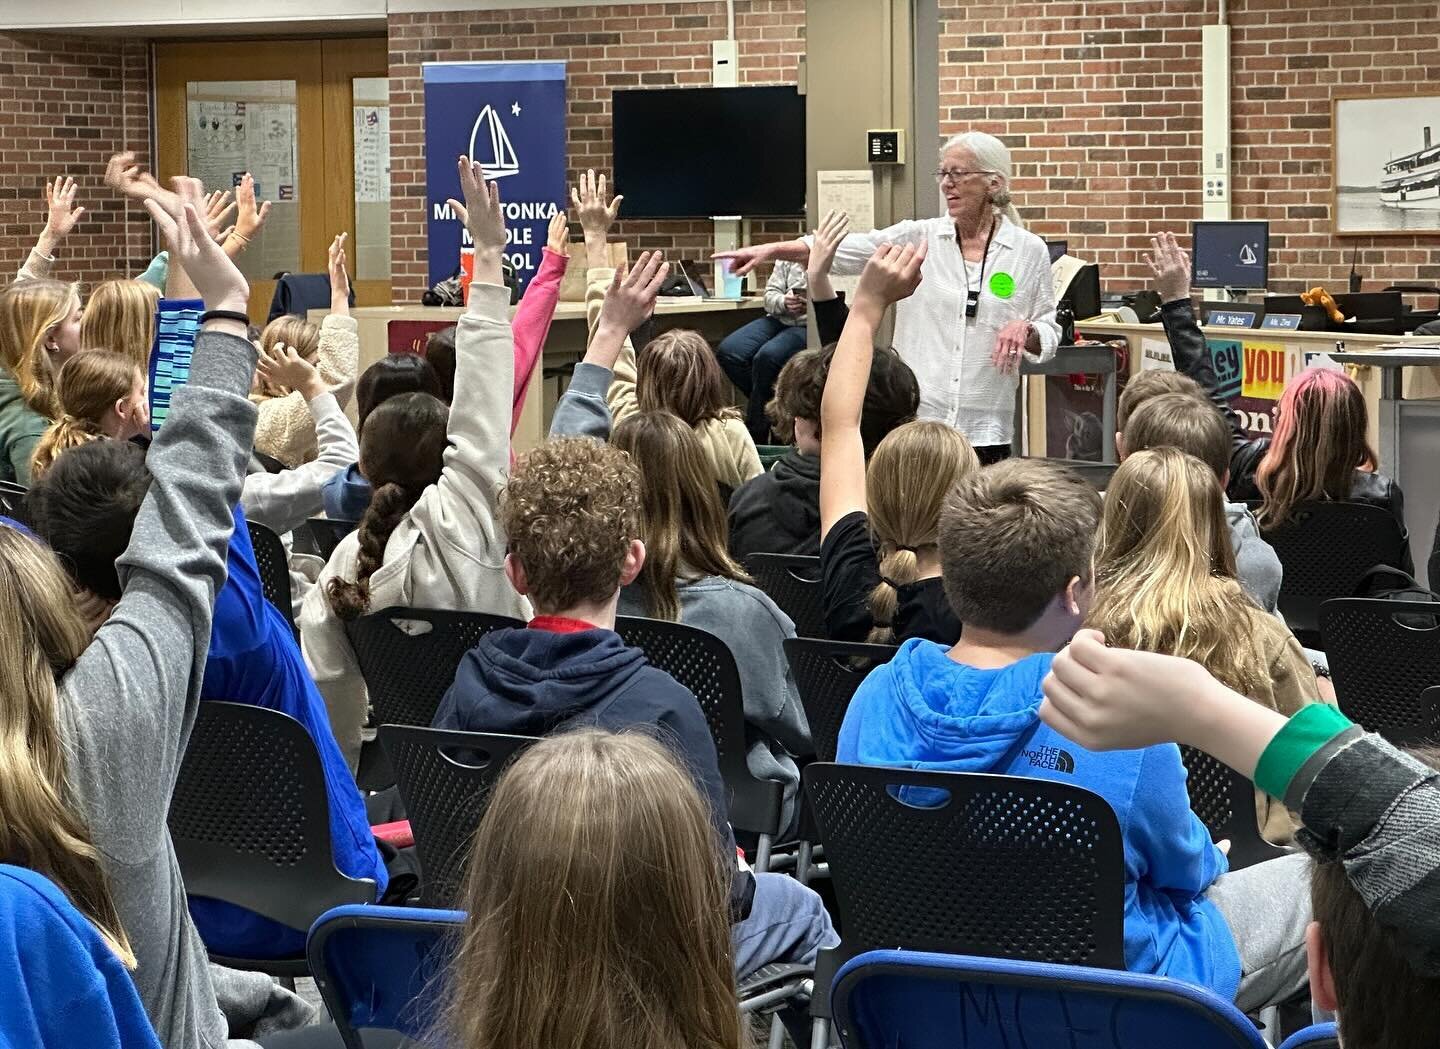 Had a grand time with young creatives (and voyageurs) at Minnetonka Middle School West. #authorvisit #kidlit #minnetonkamiddleschoolwest